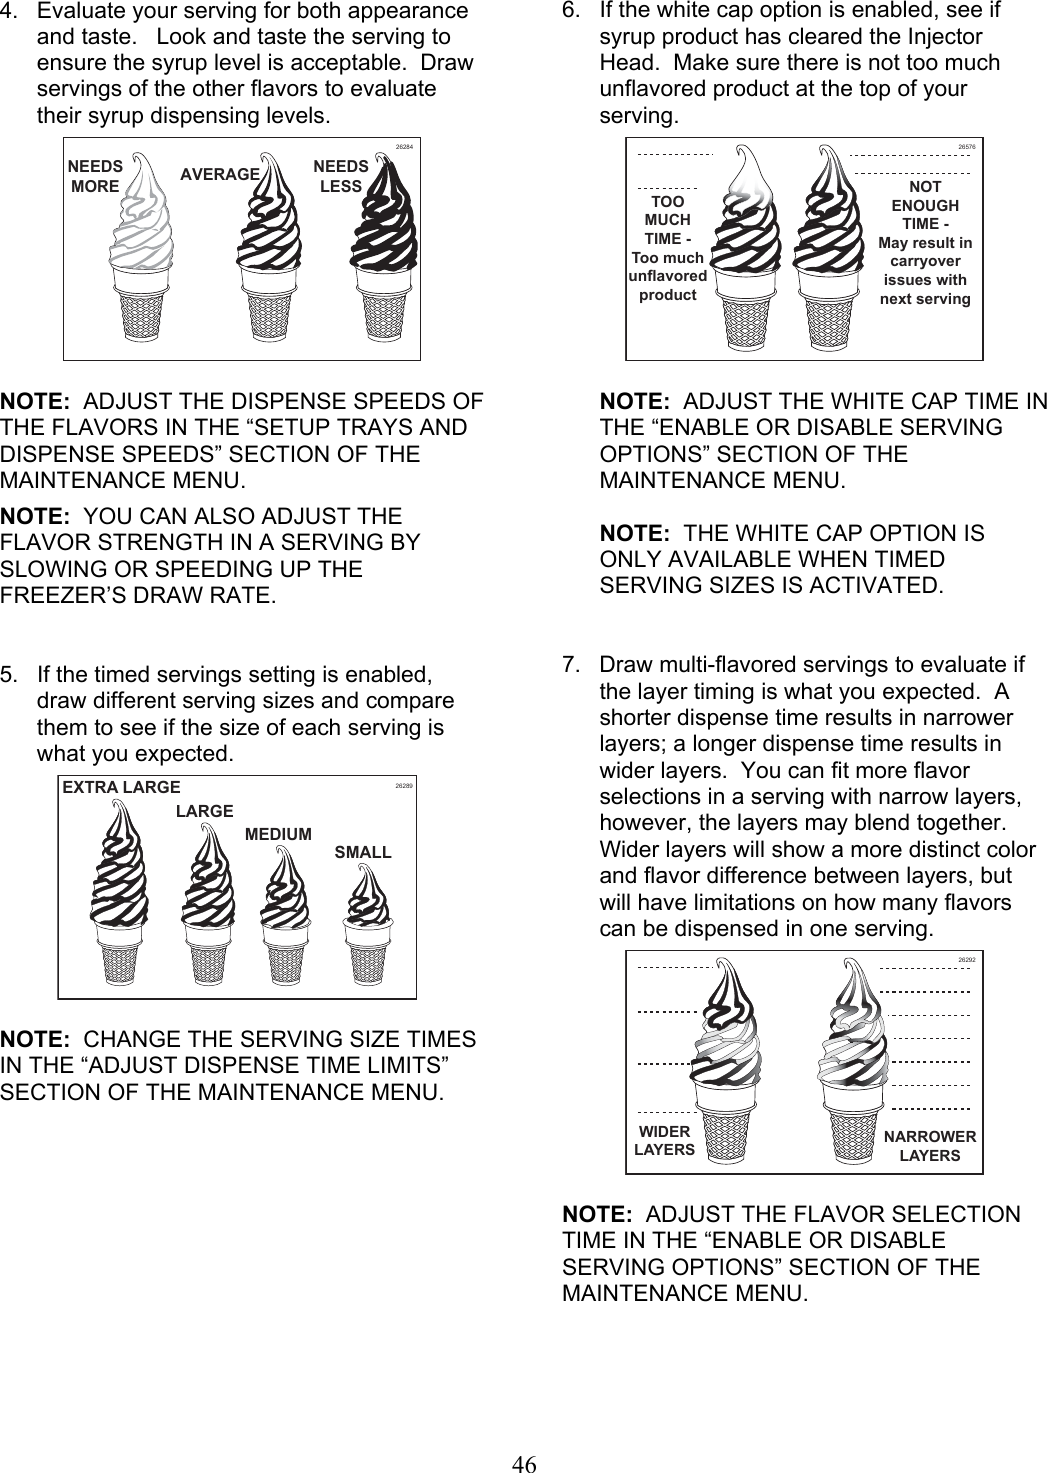 46  4.  Evaluate your serving for both appearance and taste.   Look and taste the serving to ensure the syrup level is acceptable.  Draw servings of the other flavors to evaluate their syrup dispensing levels.    NOTE:  ADJUST THE DISPENSE SPEEDS OF THE FLAVORS IN THE “SETUP TRAYS AND DISPENSE SPEEDS” SECTION OF THE MAINTENANCE MENU.  NOTE:  YOU CAN ALSO ADJUST THE FLAVOR STRENGTH IN A SERVING BY SLOWING OR SPEEDING UP THE FREEZER’S DRAW RATE.   5.  If the timed servings setting is enabled, draw different serving sizes and compare them to see if the size of each serving is what you expected.       NOTE:  CHANGE THE SERVING SIZE TIMES IN THE “ADJUST DISPENSE TIME LIMITS” SECTION OF THE MAINTENANCE MENU.    6.  If the white cap option is enabled, see if syrup product has cleared the Injector Head.  Make sure there is not too much unflavored product at the top of your serving.     NOTE:  ADJUST THE WHITE CAP TIME IN THE “ENABLE OR DISABLE SERVING OPTIONS” SECTION OF THE MAINTENANCE MENU.    NOTE:  THE WHITE CAP OPTION IS ONLY AVAILABLE WHEN TIMED SERVING SIZES IS ACTIVATED.    7.  Draw multi-flavored servings to evaluate if the layer timing is what you expected.  A shorter dispense time results in narrower layers; a longer dispense time results in wider layers.  You can fit more flavor selections in a serving with narrow layers, however, the layers may blend together. Wider layers will show a more distinct color and flavor difference between layers, but will have limitations on how many flavors can be dispensed in one serving.      NOTE:  ADJUST THE FLAVOR SELECTION TIME IN THE “ENABLE OR DISABLE SERVING OPTIONS” SECTION OF THE MAINTENANCE MENU.     26284NEEDS LESSAVERAGENEEDSMORE26289SMALLMEDIUMEXTRA LARGELARGE26576TOO MUCH TIME - Too much unflavored productNOT ENOUGH TIME - May result in carryover issues with next serving26292WIDER LAYERS NARROWER LAYERS